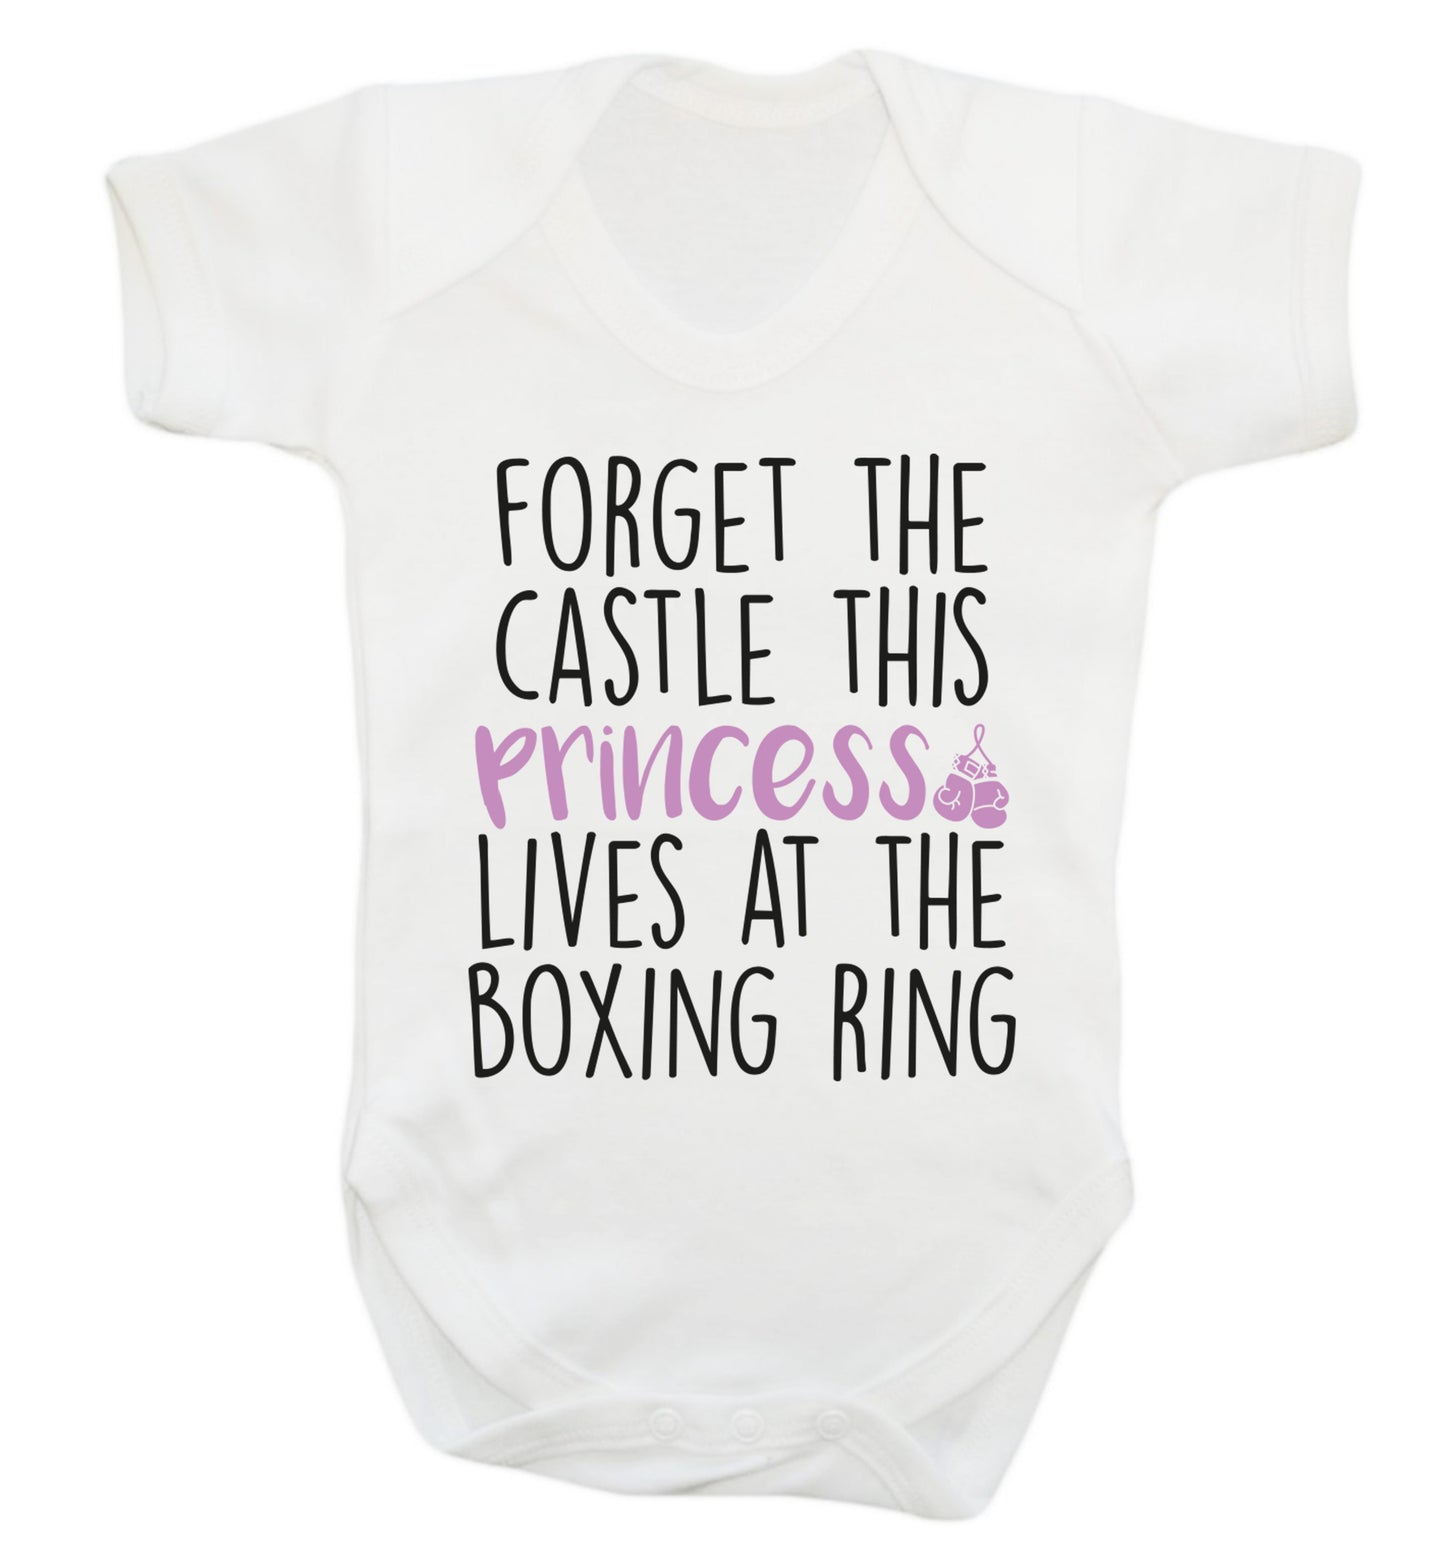 Forget the castle this princess lives at the boxing ring Baby Vest white 18-24 months